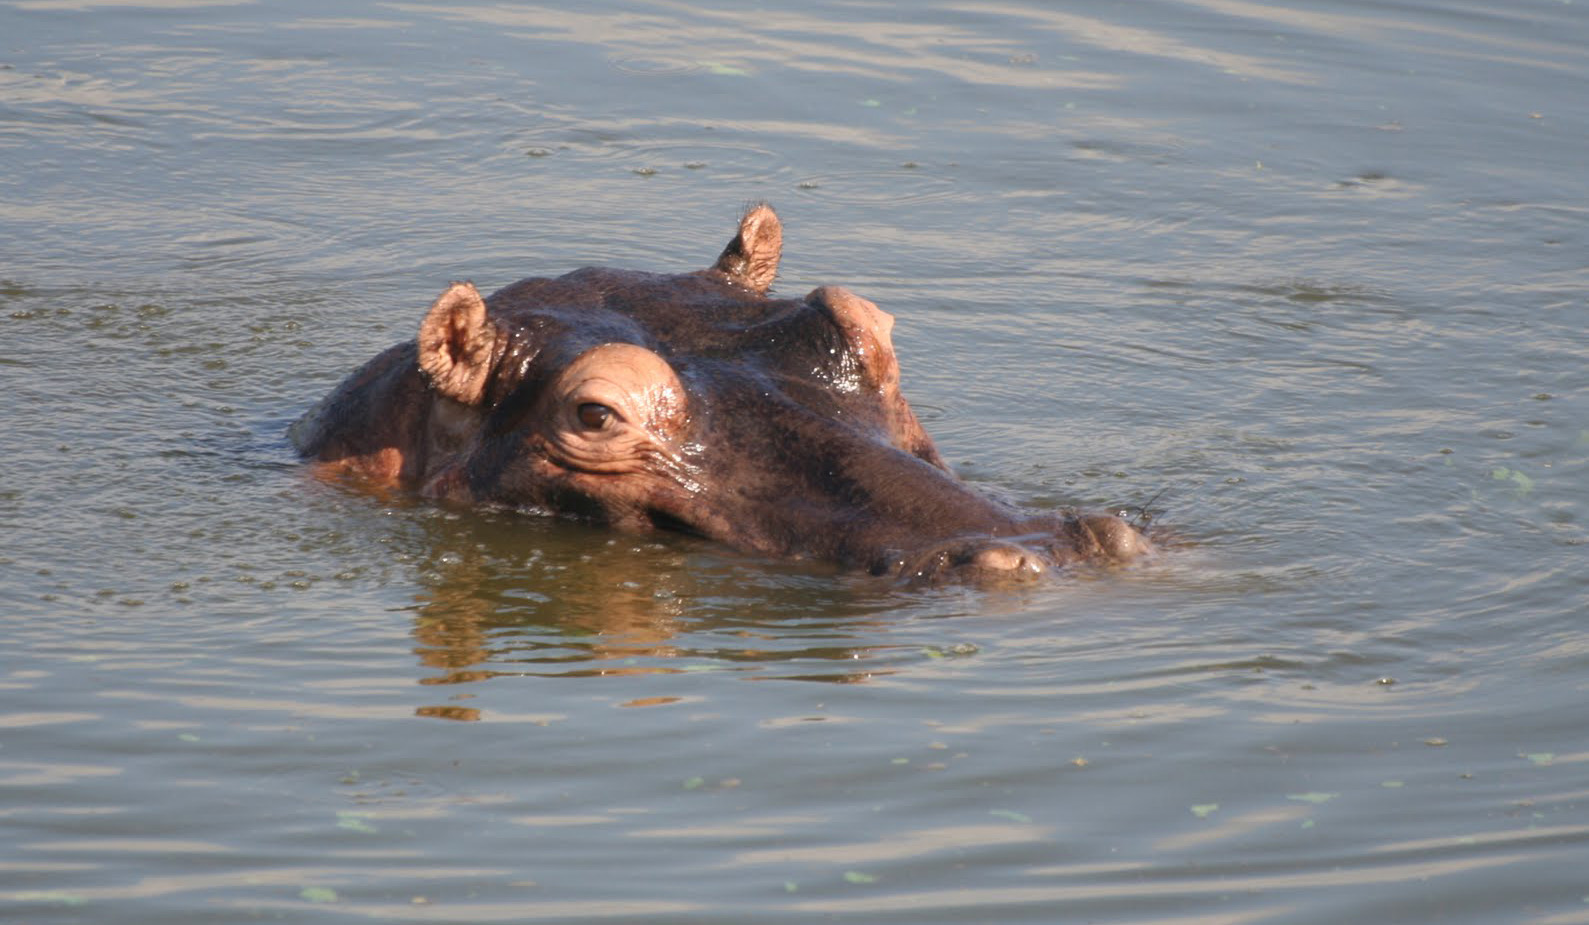 Hippos in the Kruger National Park viewable from Marloth Park